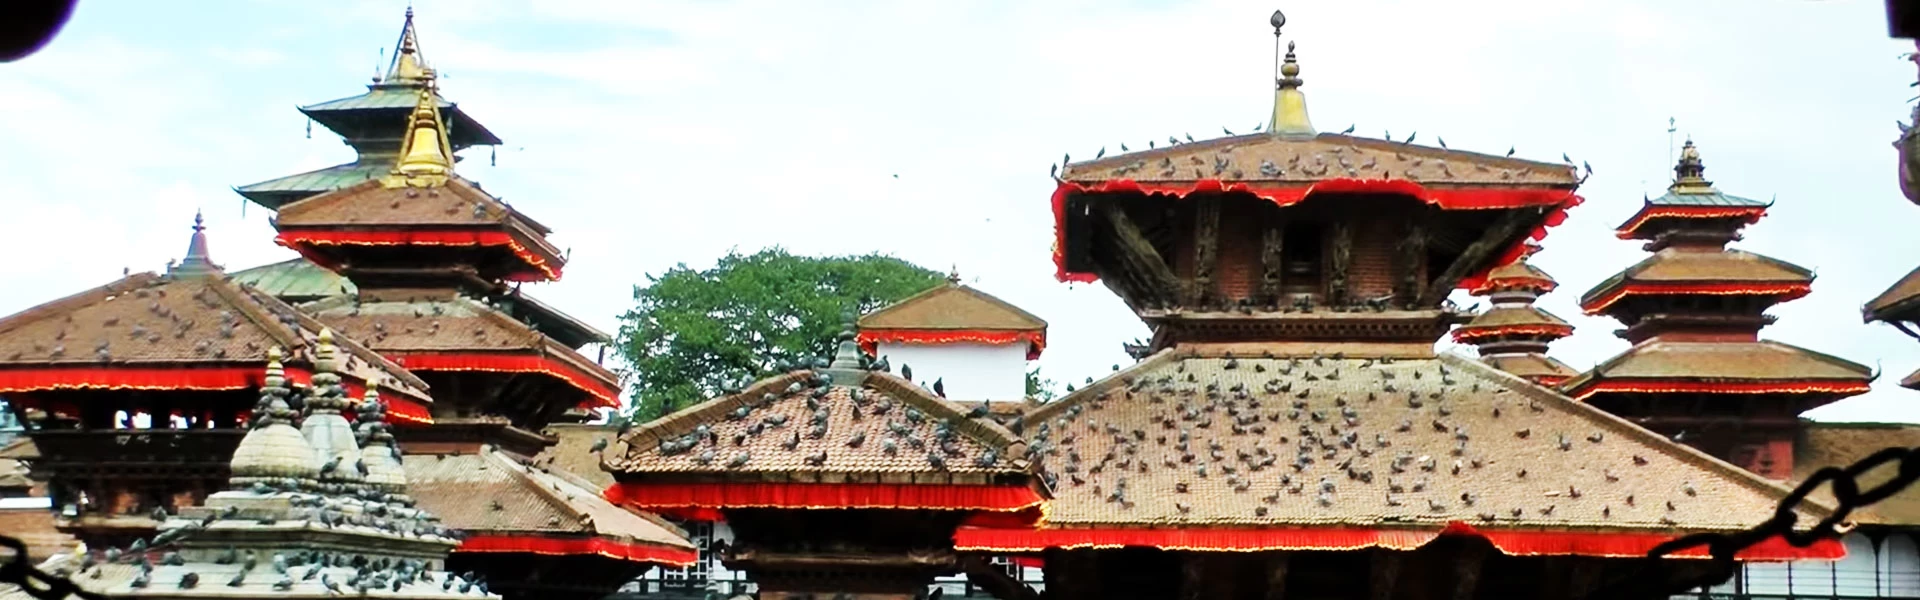 Big flock of pigeons are sitting on the temples of the Kathmandu durbar square.